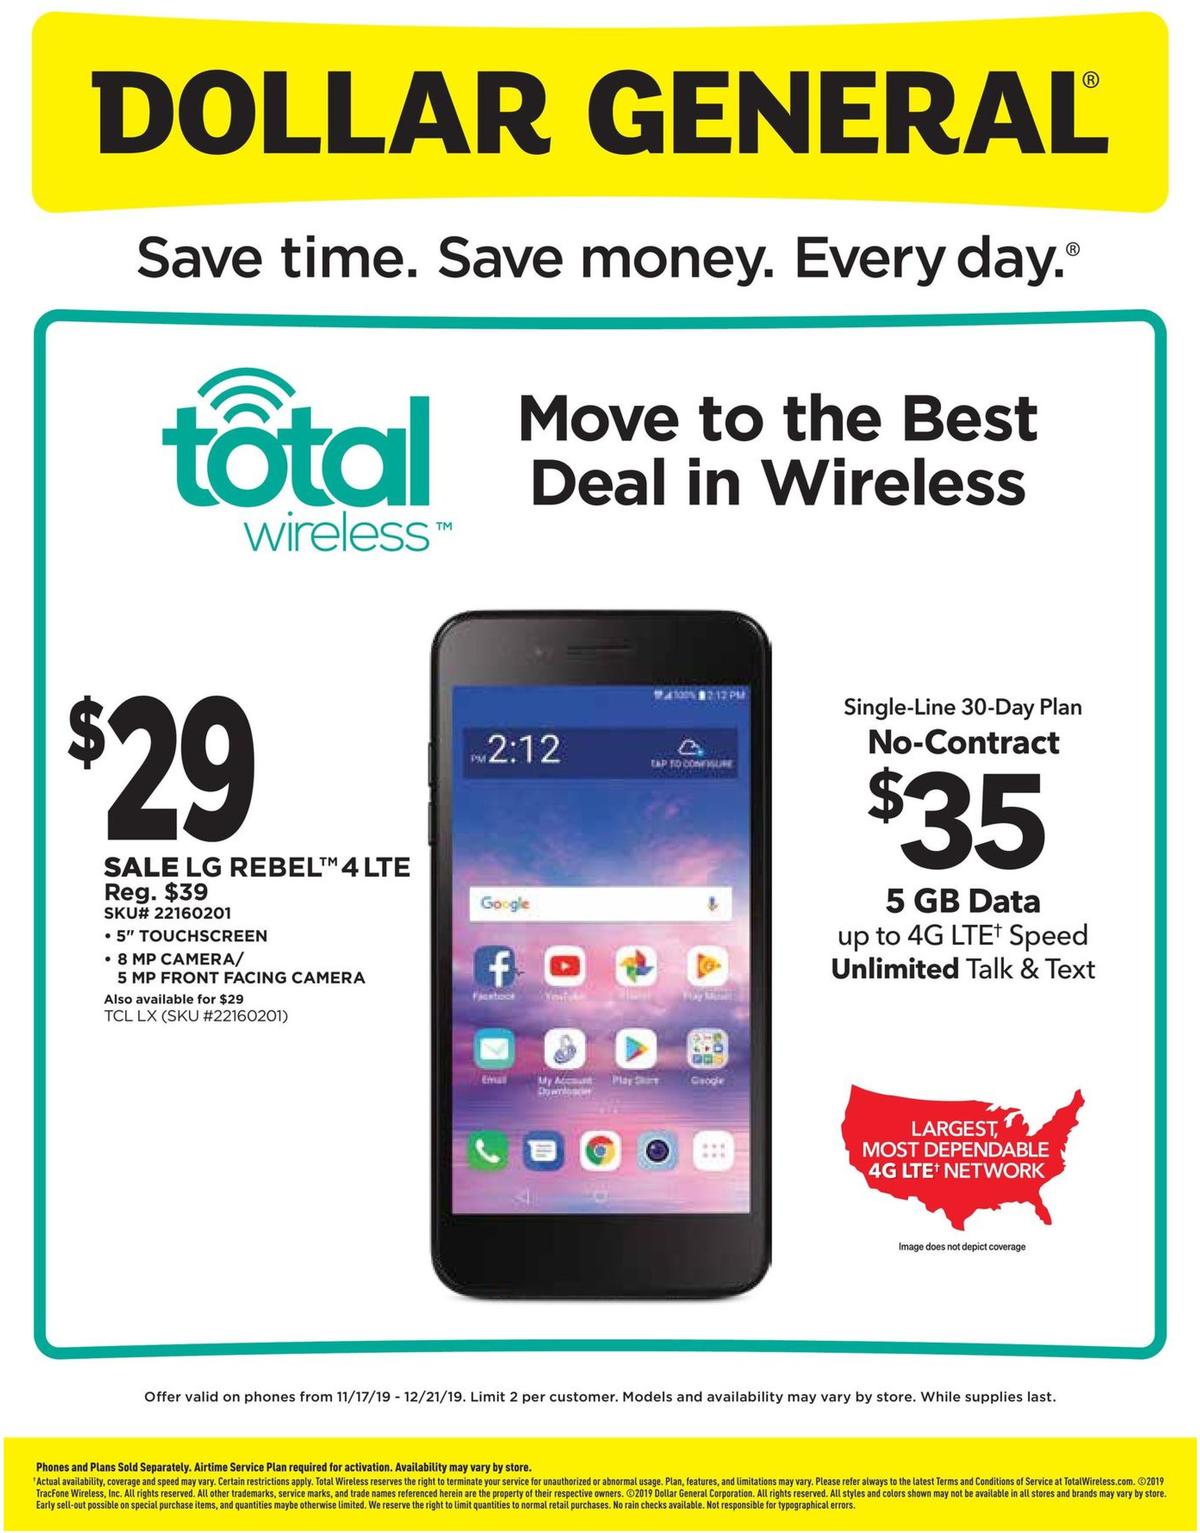 Dollar General Weekly Wireless Specials Weekly Ad from November 17